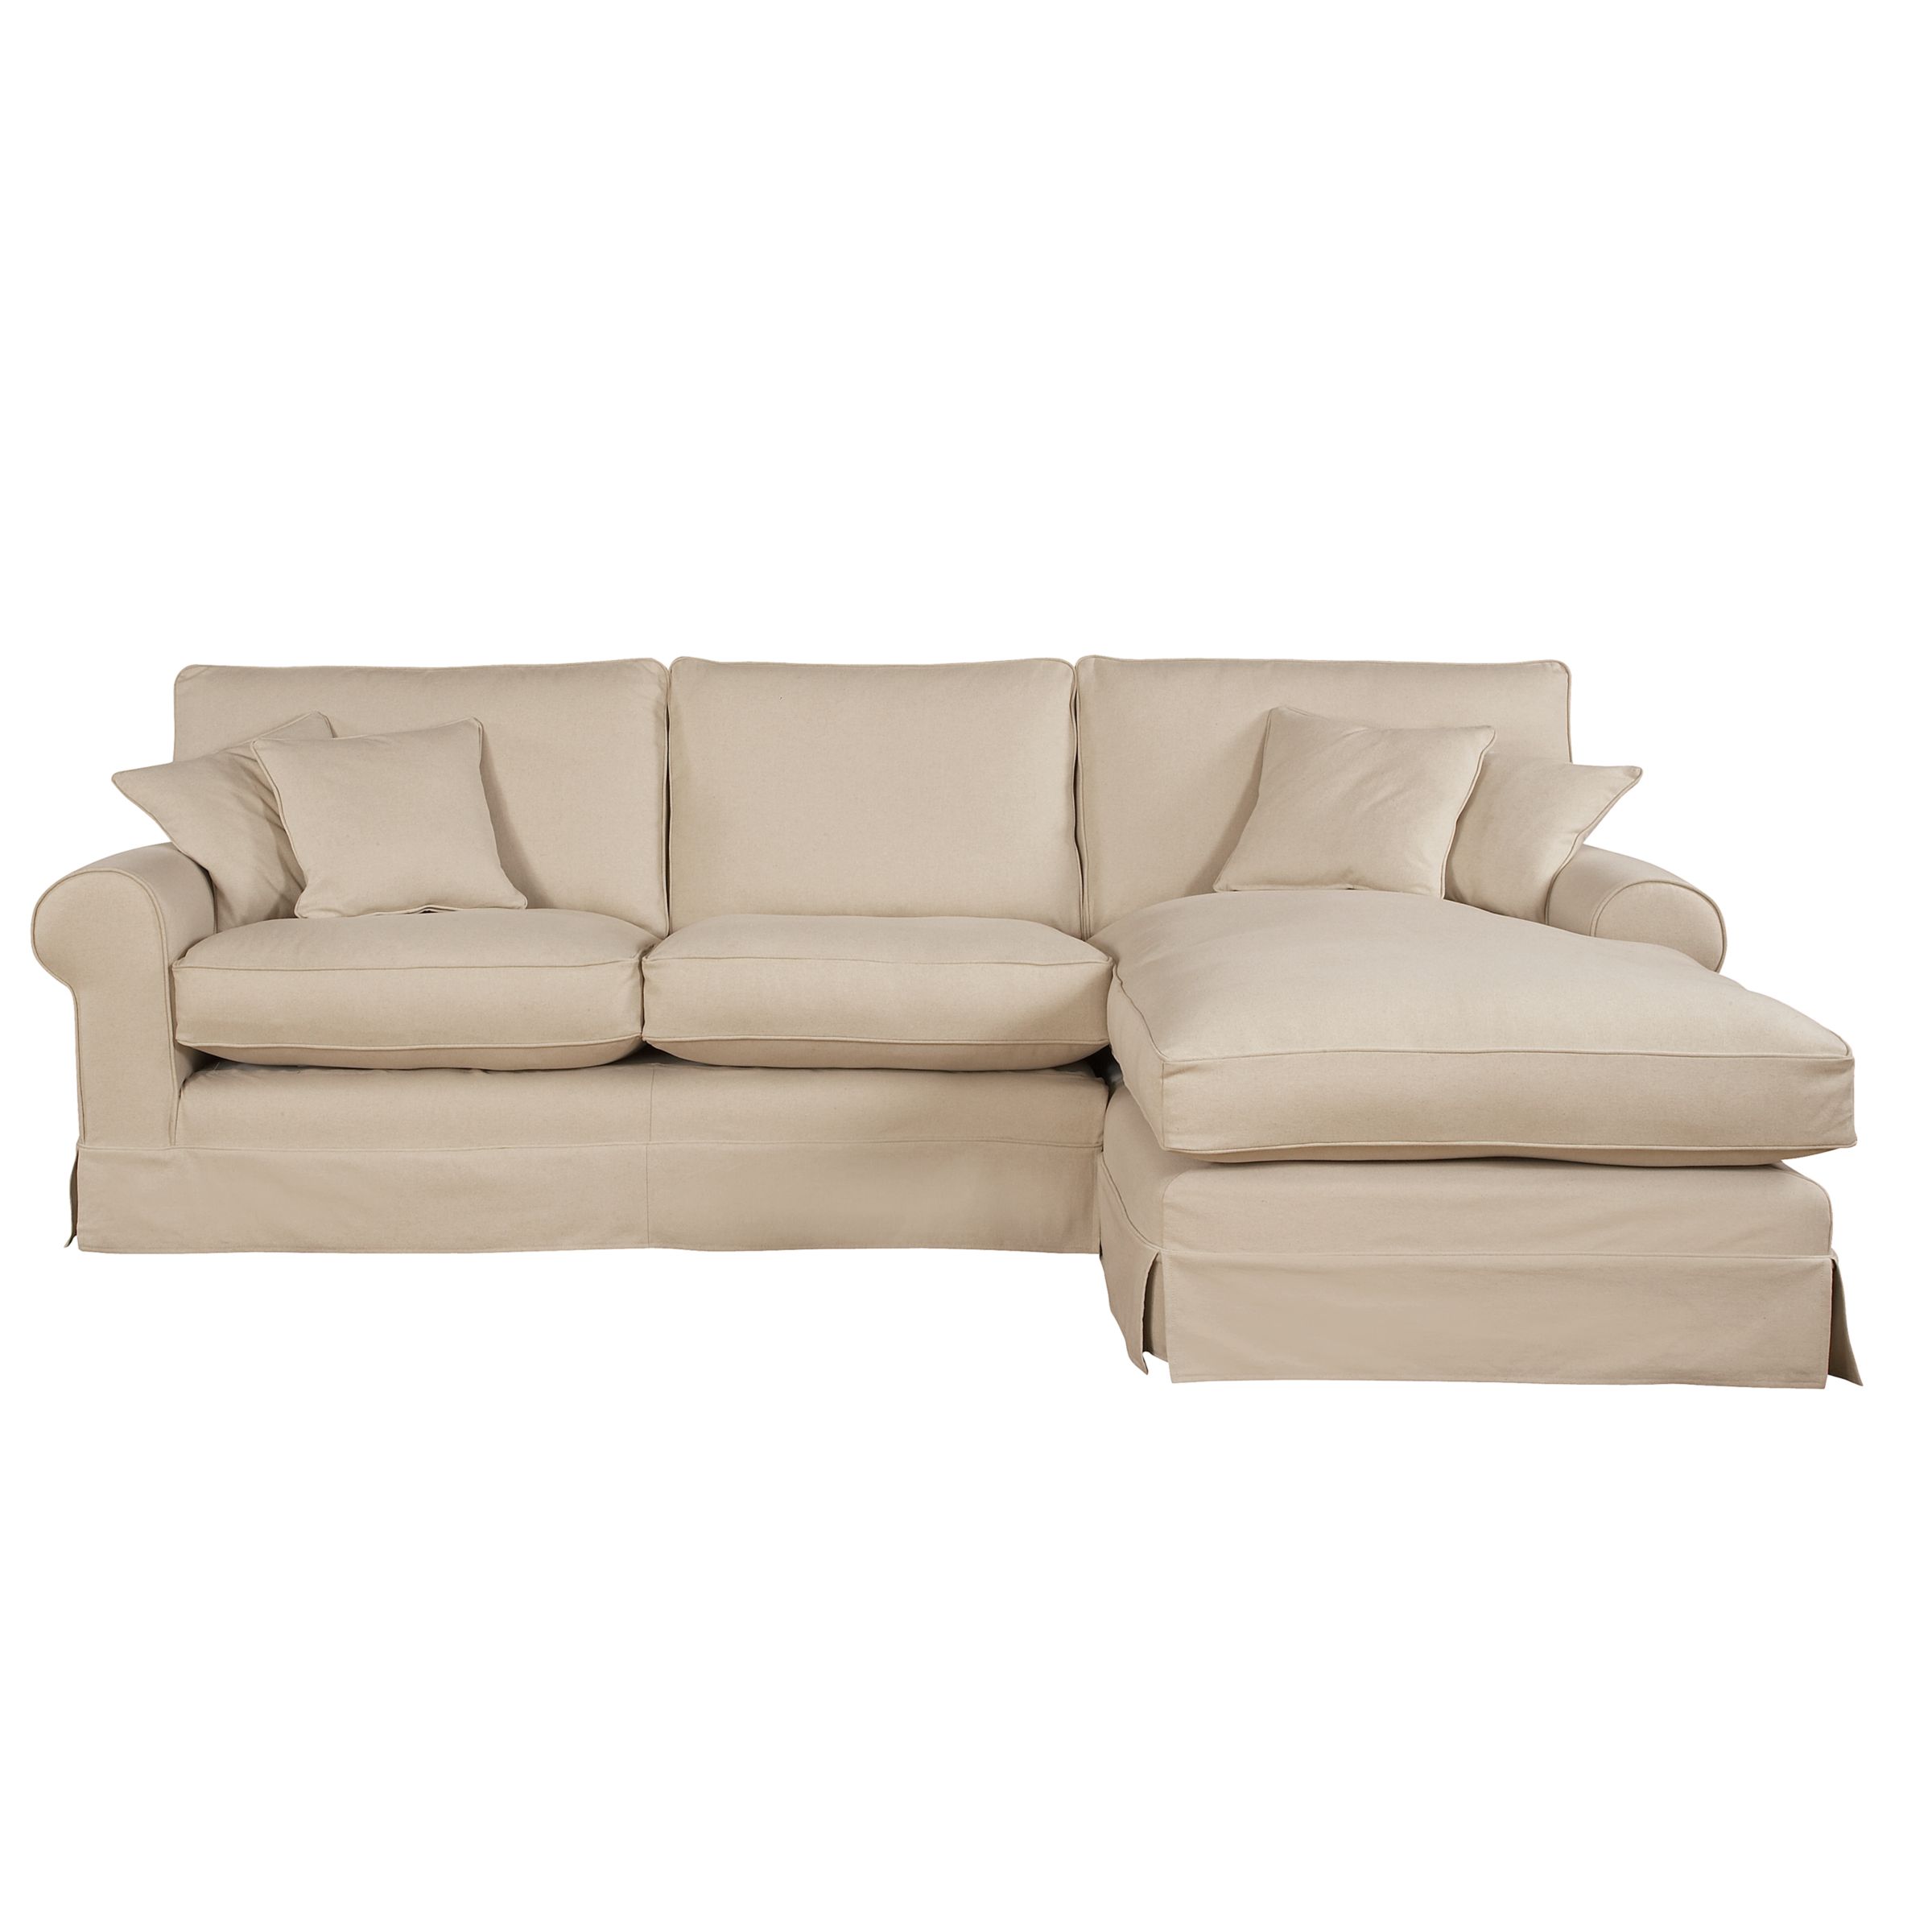 John Lewis Padstow Chaise End Right Facing Sofa